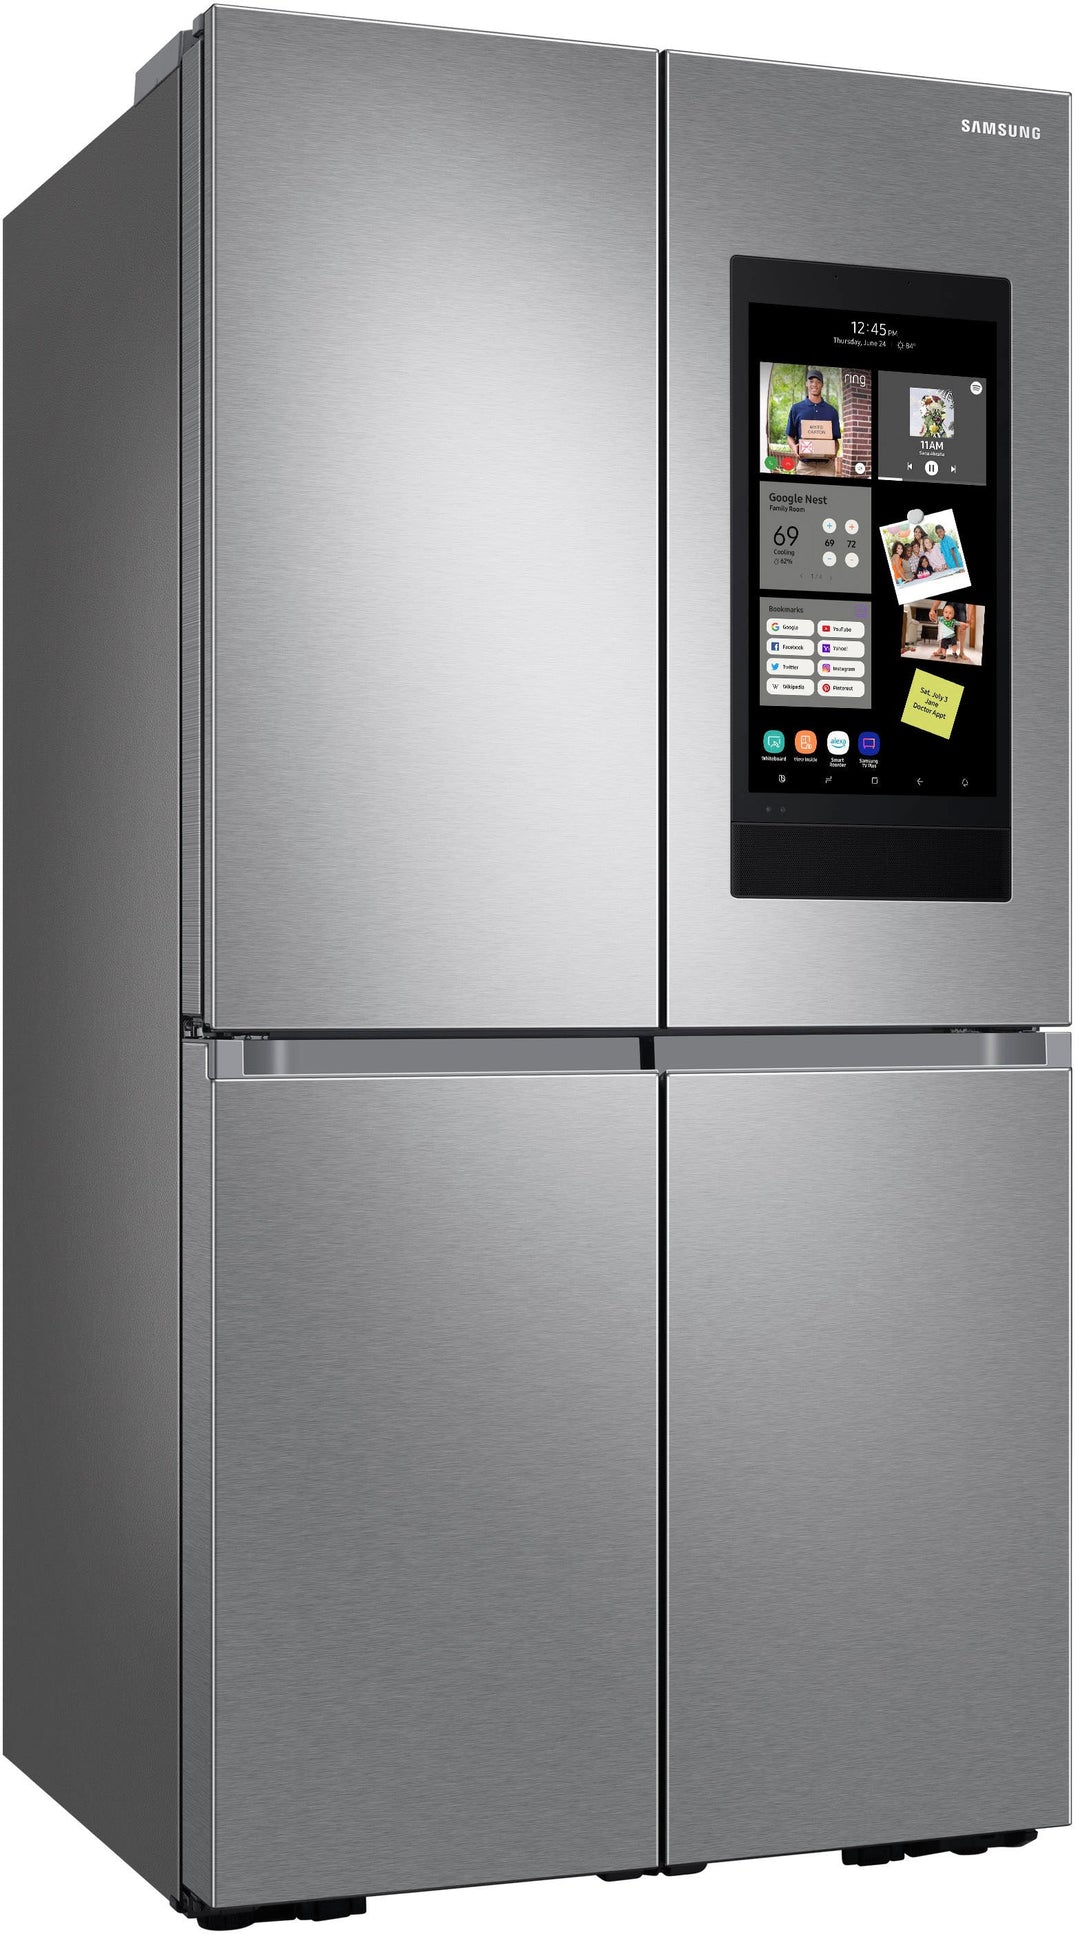 Samsung - 29 cu. ft. Smart 4-Door Flex™ refrigerator with Family Hub™ and Beverage Center - Stainless steel_2